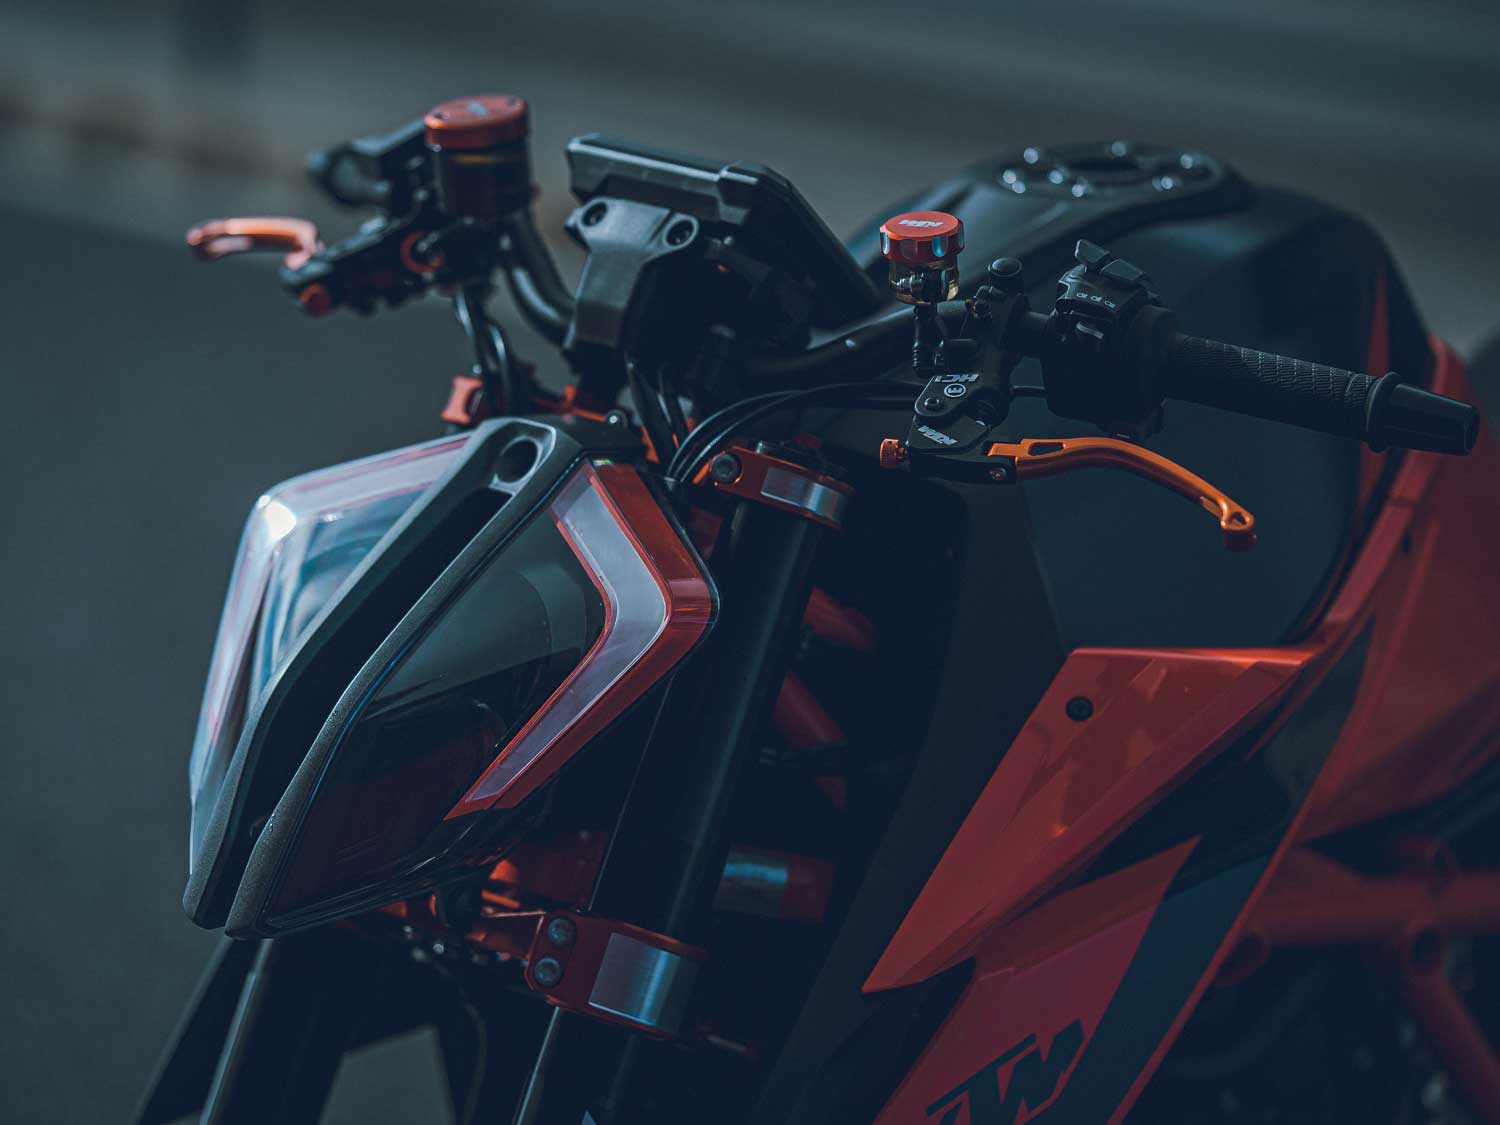 2020 KTM 1290 Super Duke R Review First Ride Photo Gallery | Motorcyclist